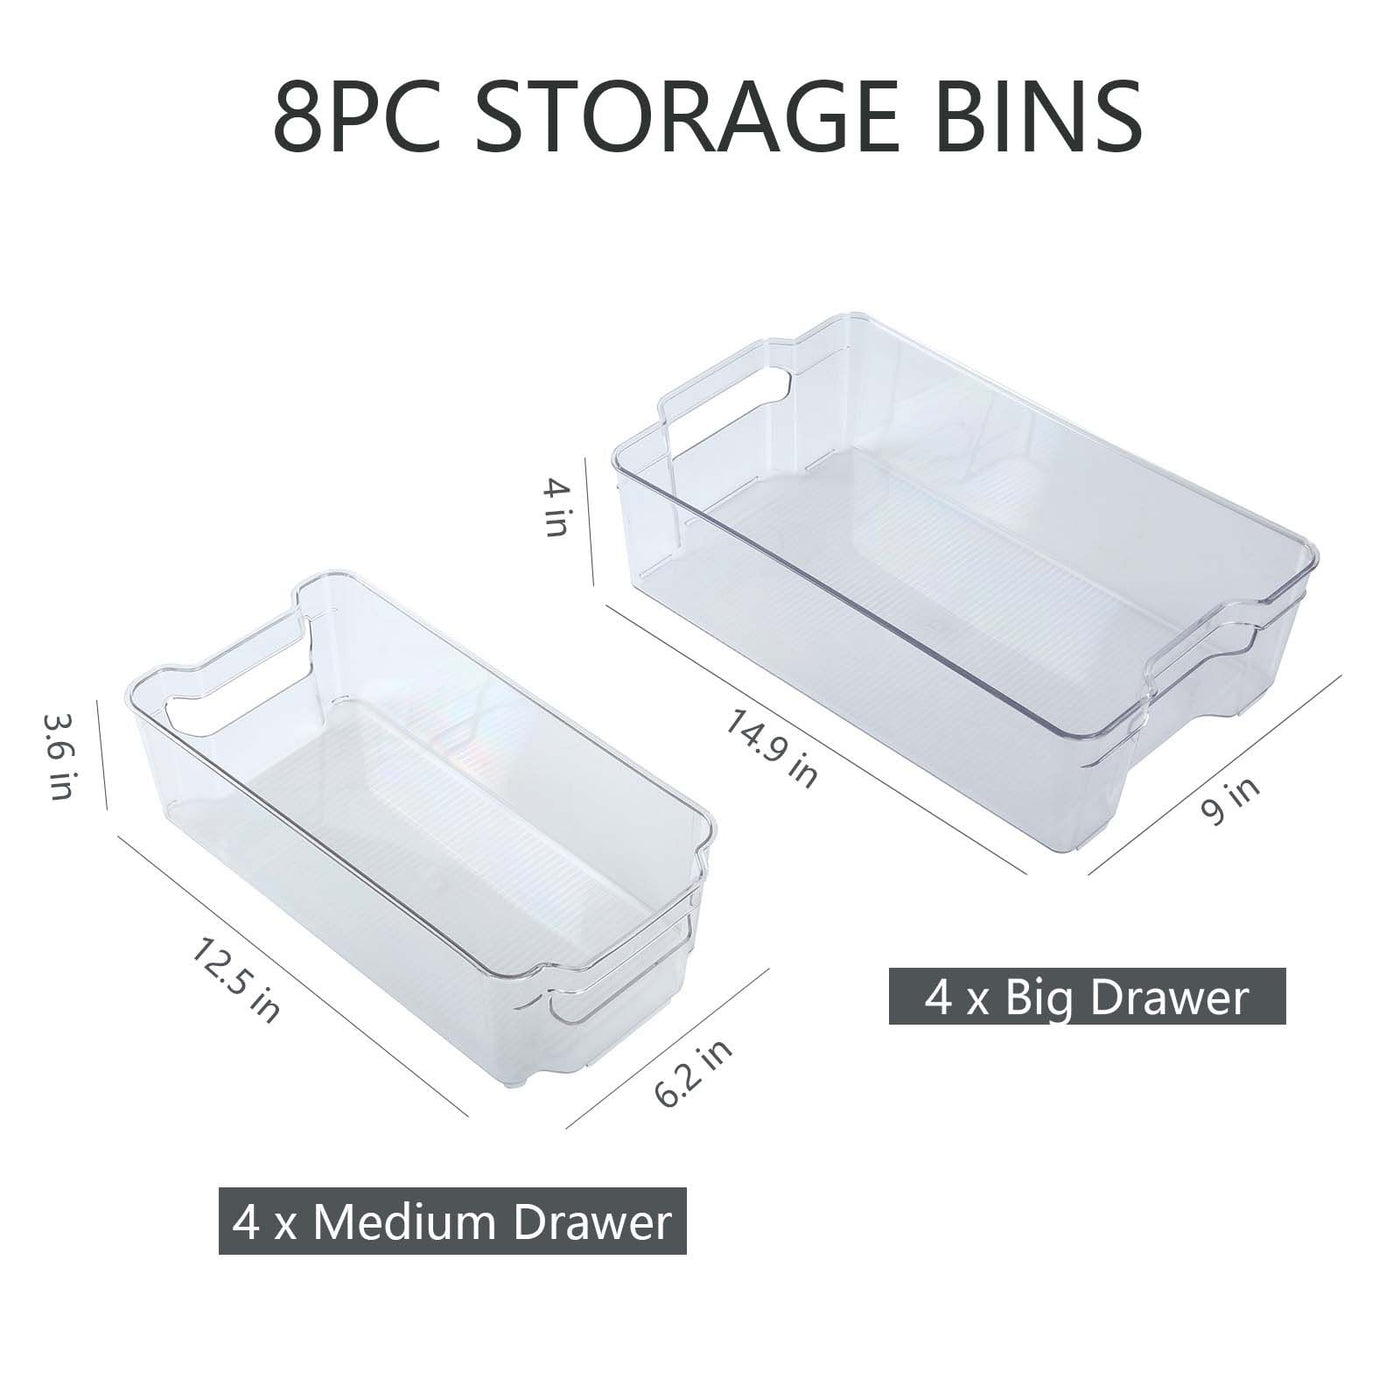 Set of 8 Home Pantry Organizer Bins - 4 Large and 4 Medium - Stackable Plastic Clear Food Storage Bin with Handles for Freezer